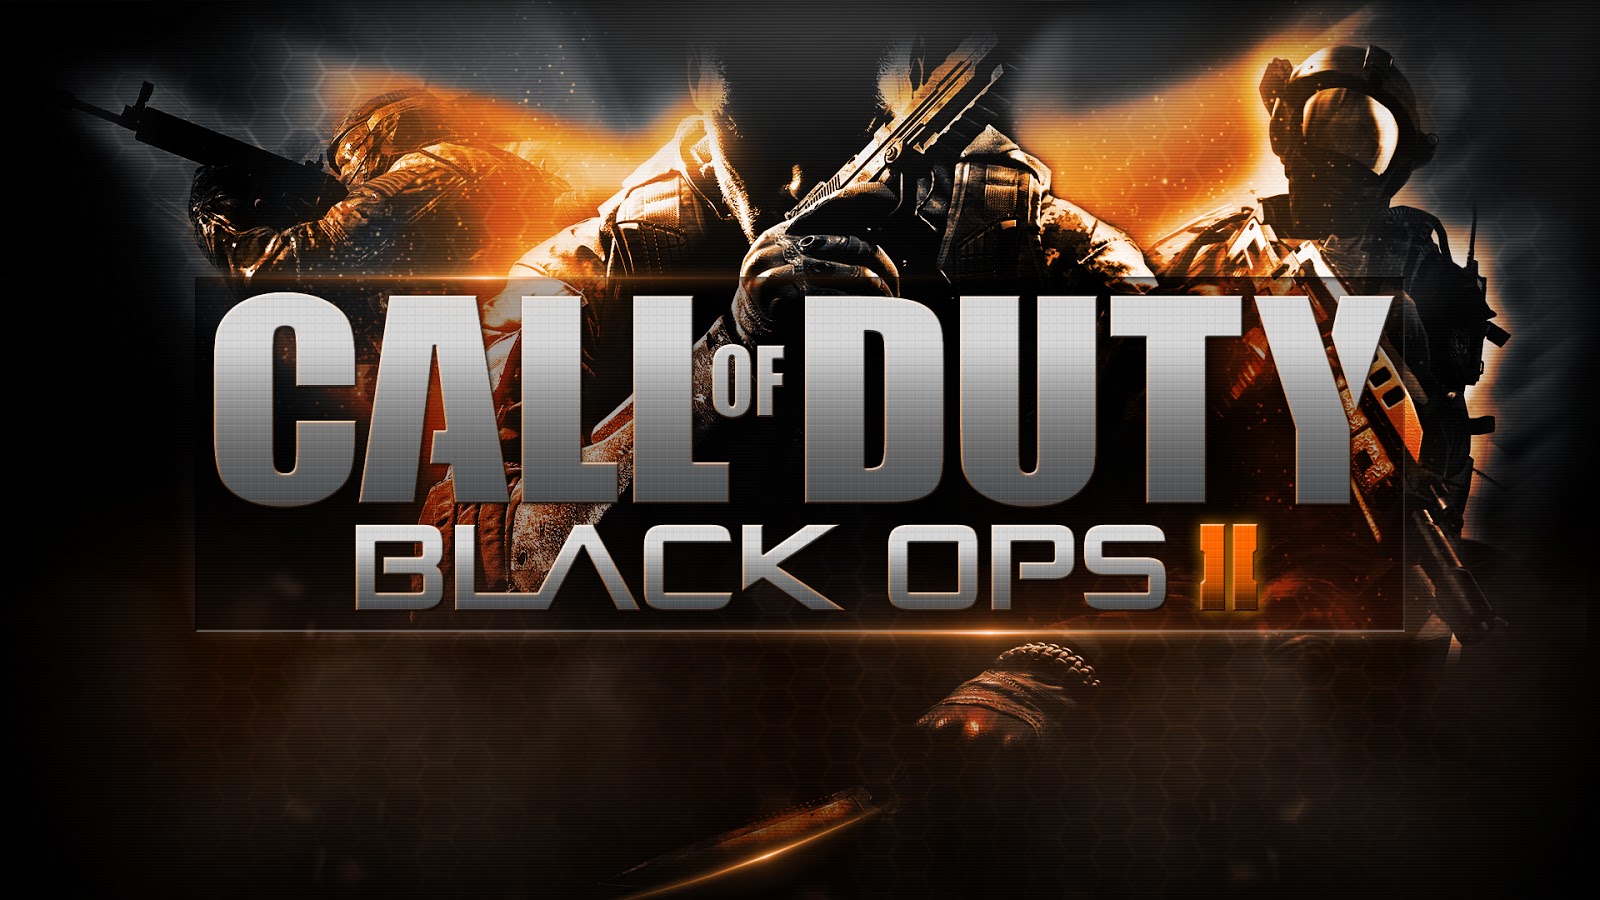 Gta Black Ops Halo Into One Banner Request